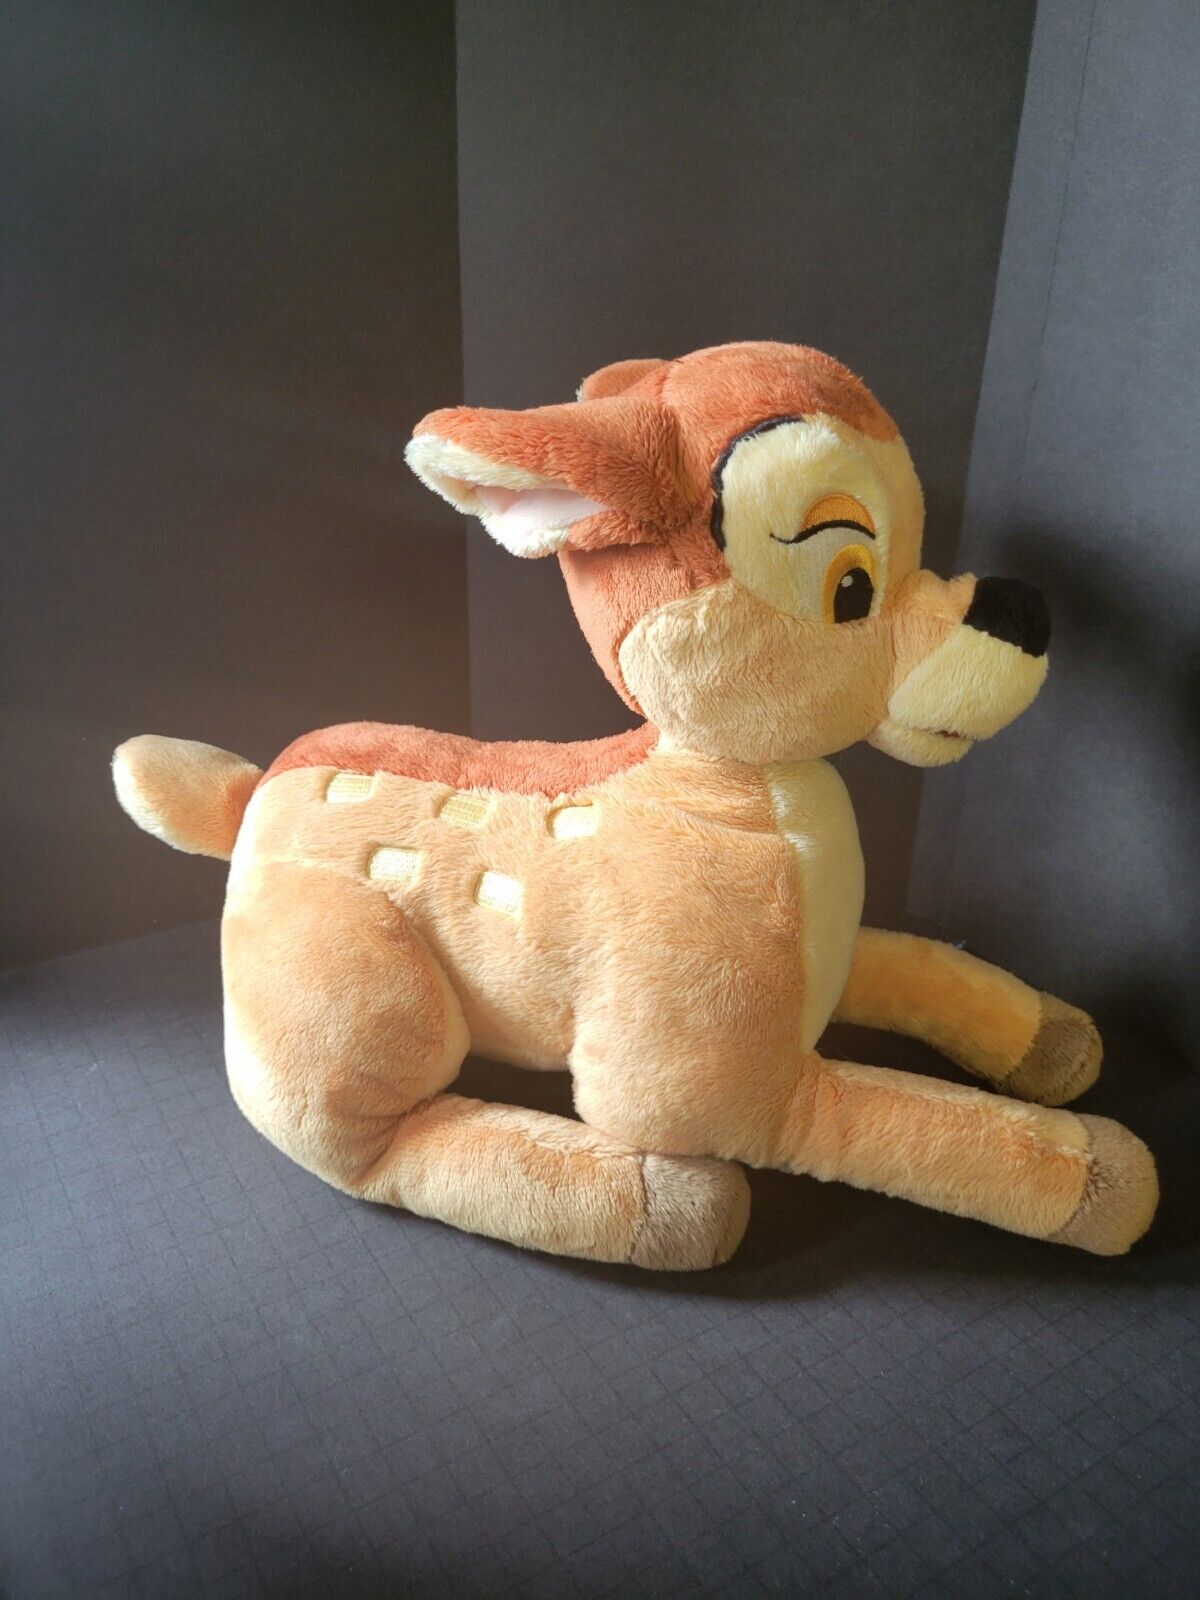 Disney Store Bambi Plush Authentic Exclusive 13” Fawn Deer Stuffed Animal Soft